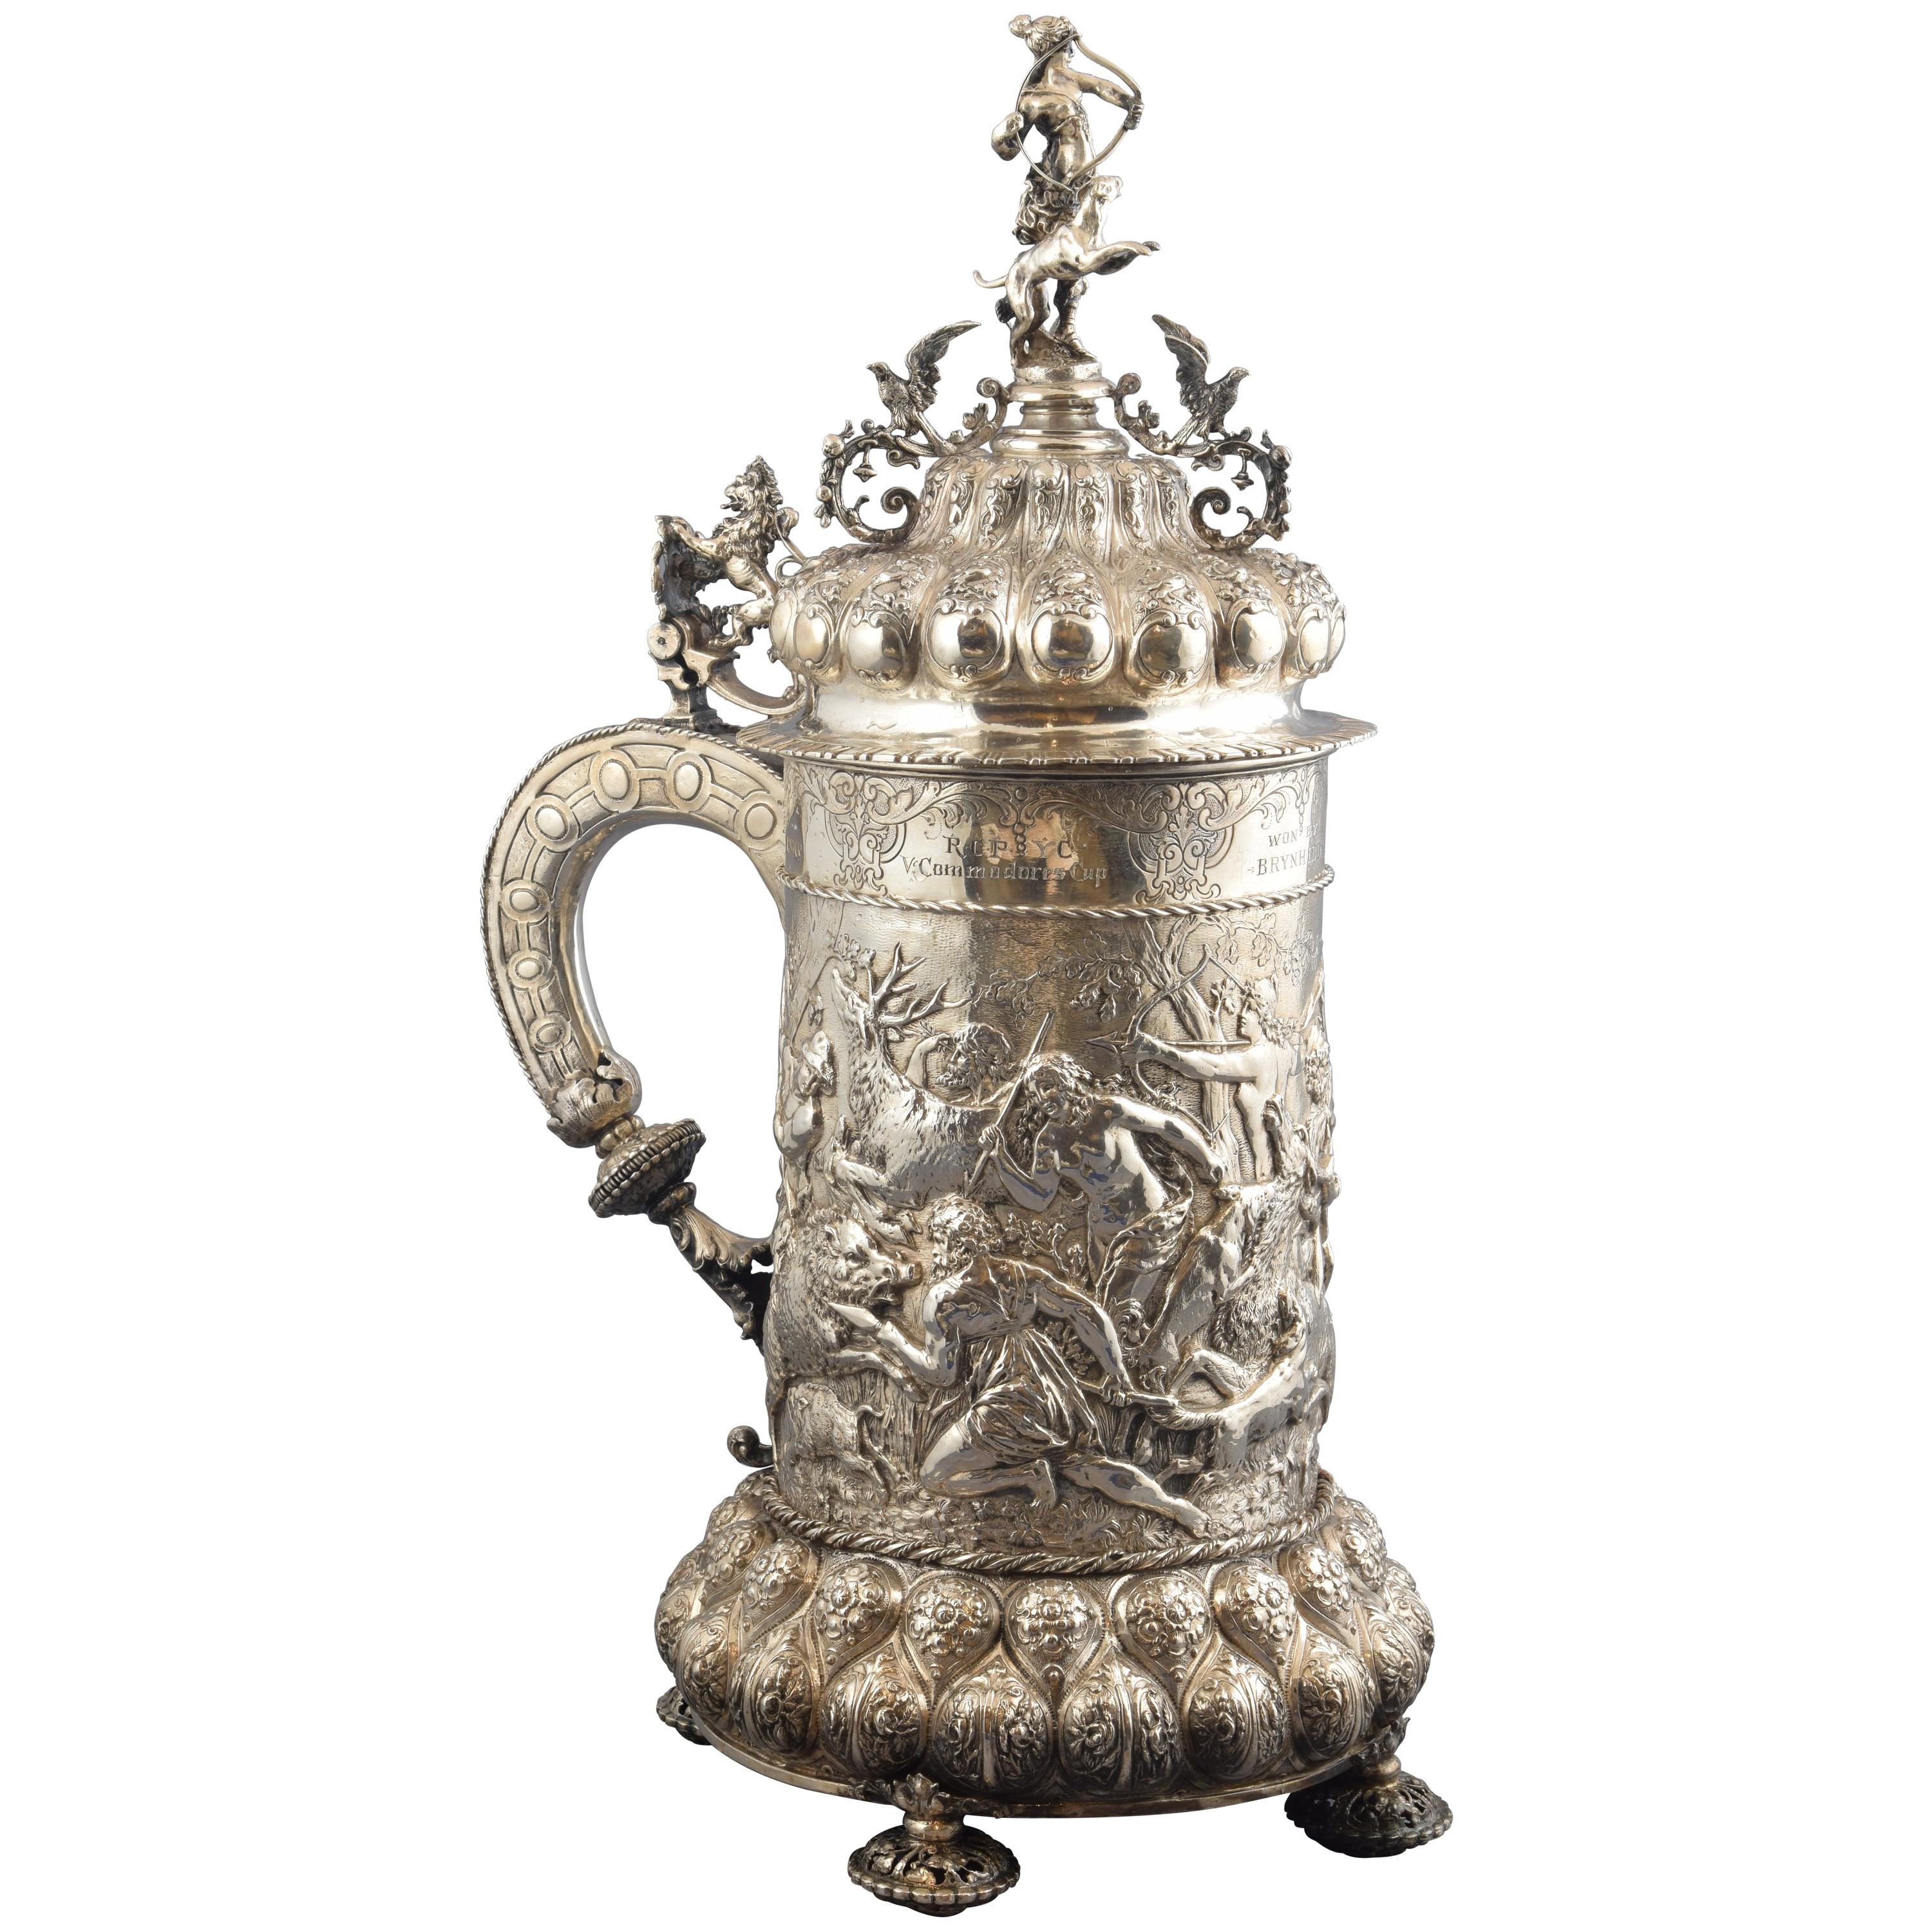 Silver Tankard "Commodore Cup" Trophy from Dover, English Import